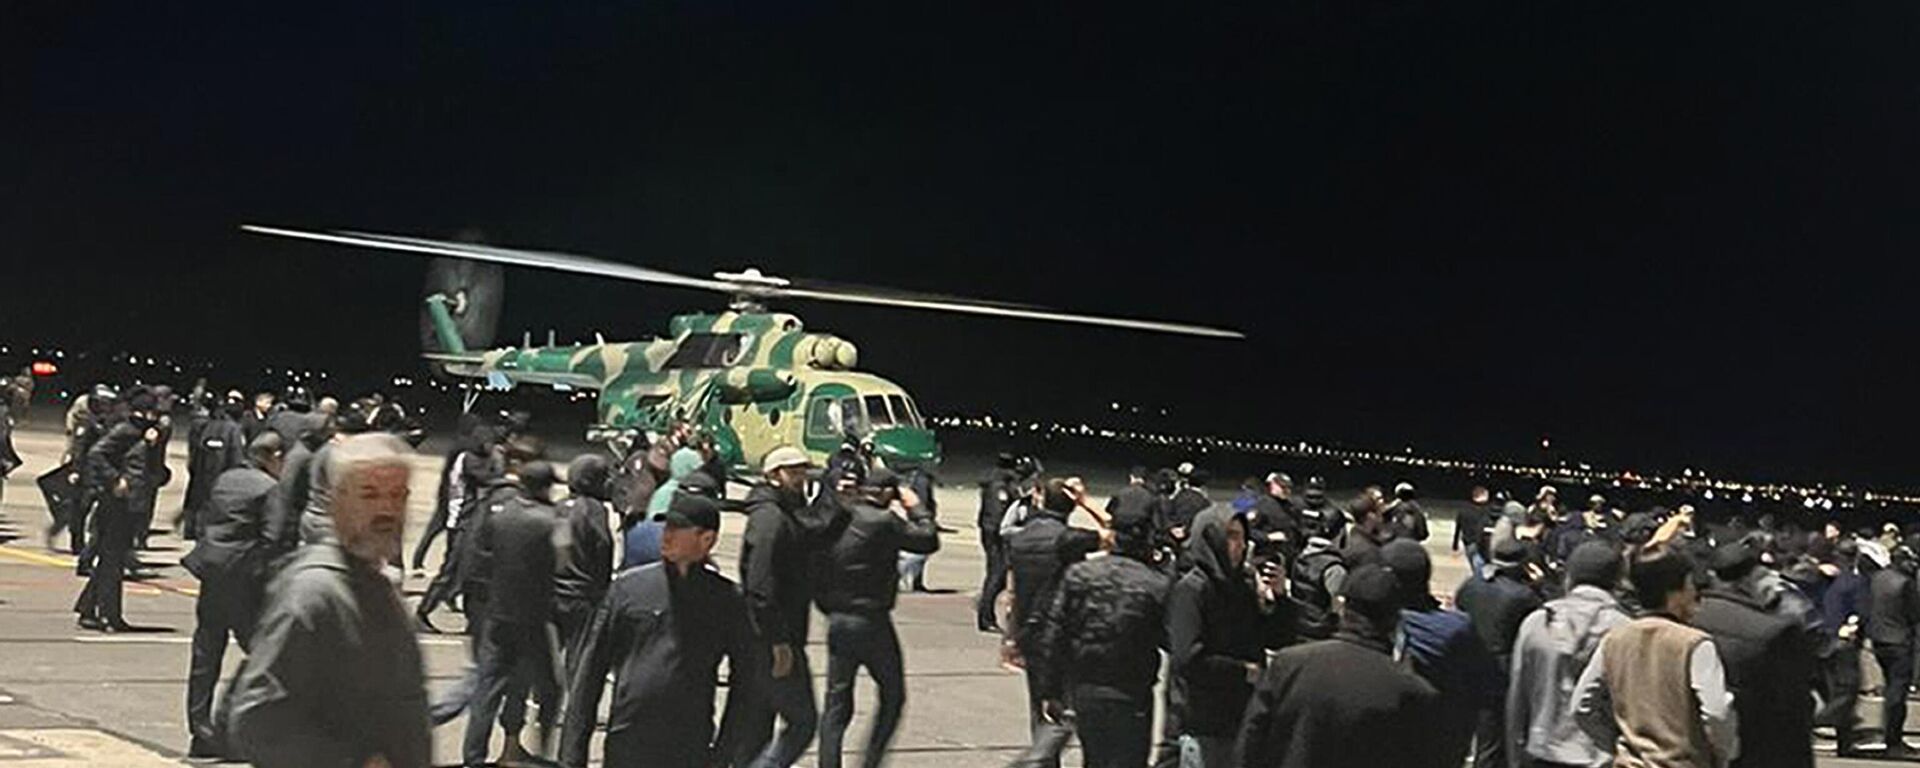 A crowd that forced its way to an airfield of the airport in Makhachkala, Russia, Monday, Oct. 30, 2023, to protest the arrival of an airliner coming to Dagestan from Tel Aviv, Israel - Sputnik International, 1920, 30.10.2023